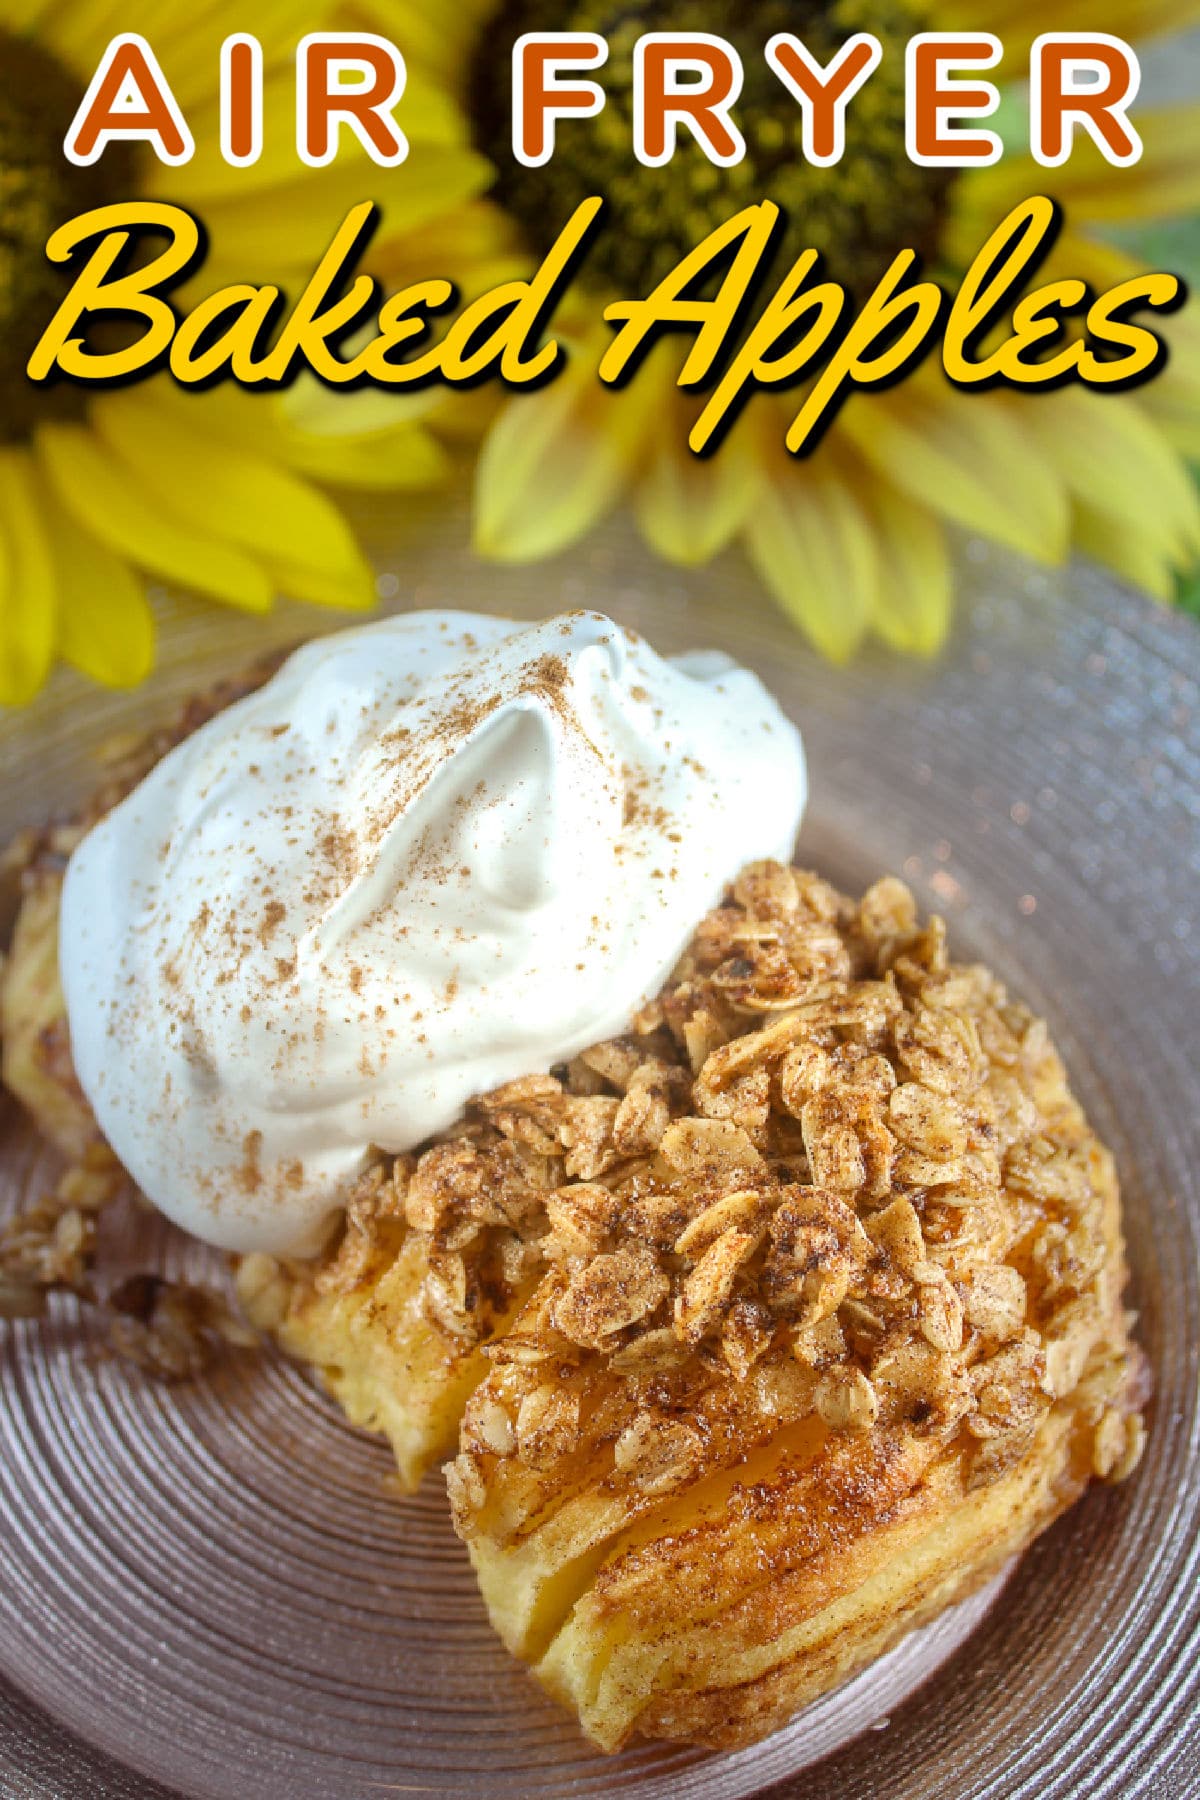 Air Fryer Baked Apples are my new obsession!!! I've been loving my Air Fryer Grilled Peaches all summer and with apple season just around the corner - I had to get in the kitchen to see what I could do. I'll just say - I outdid myself! via @foodhussy